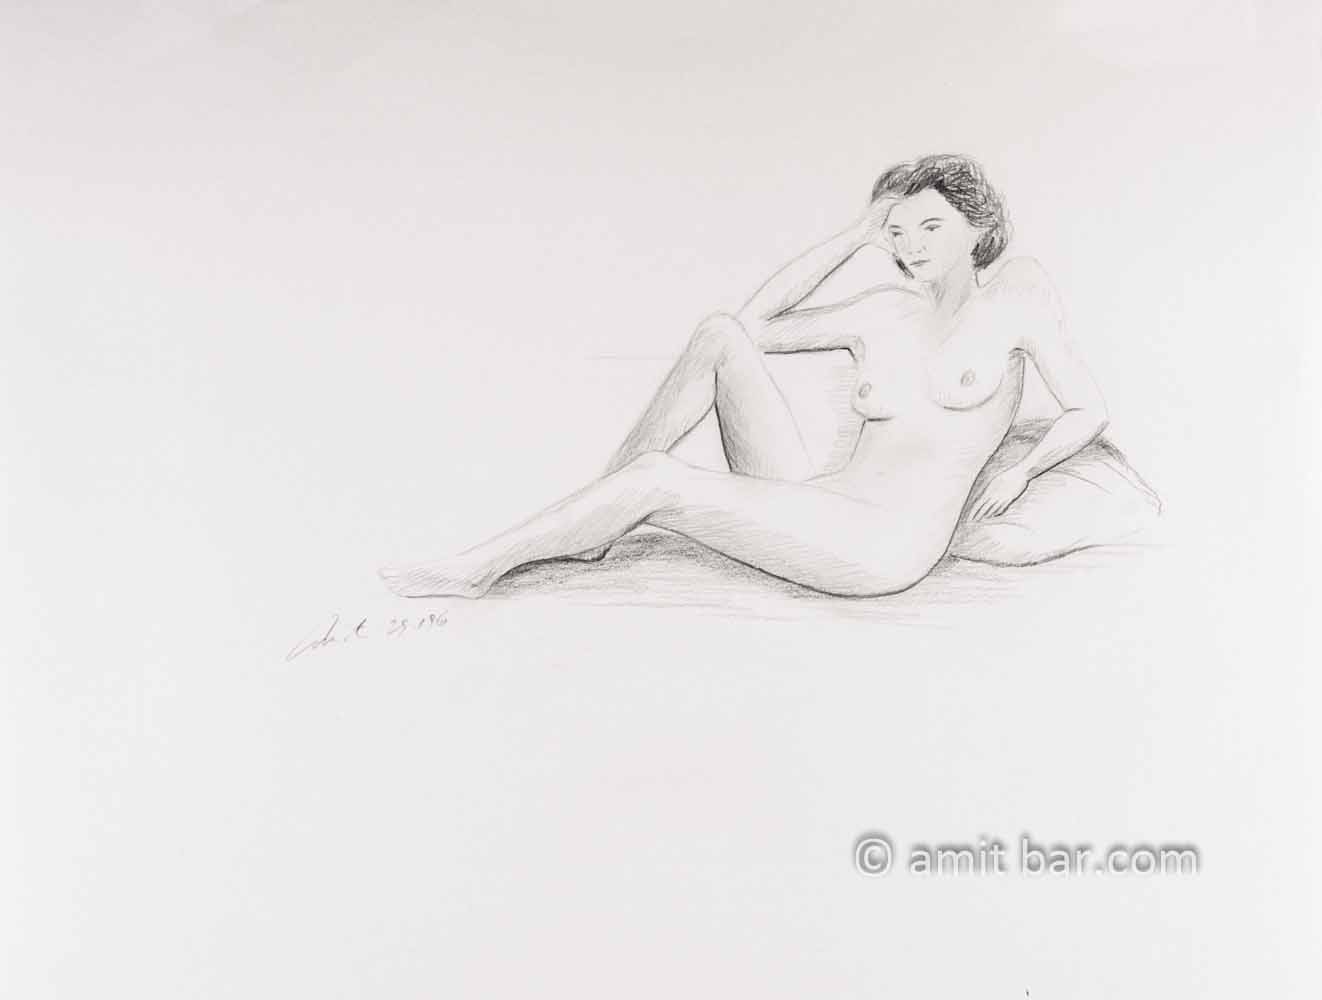 Nude figure leaning on her knee. Pencil drawing